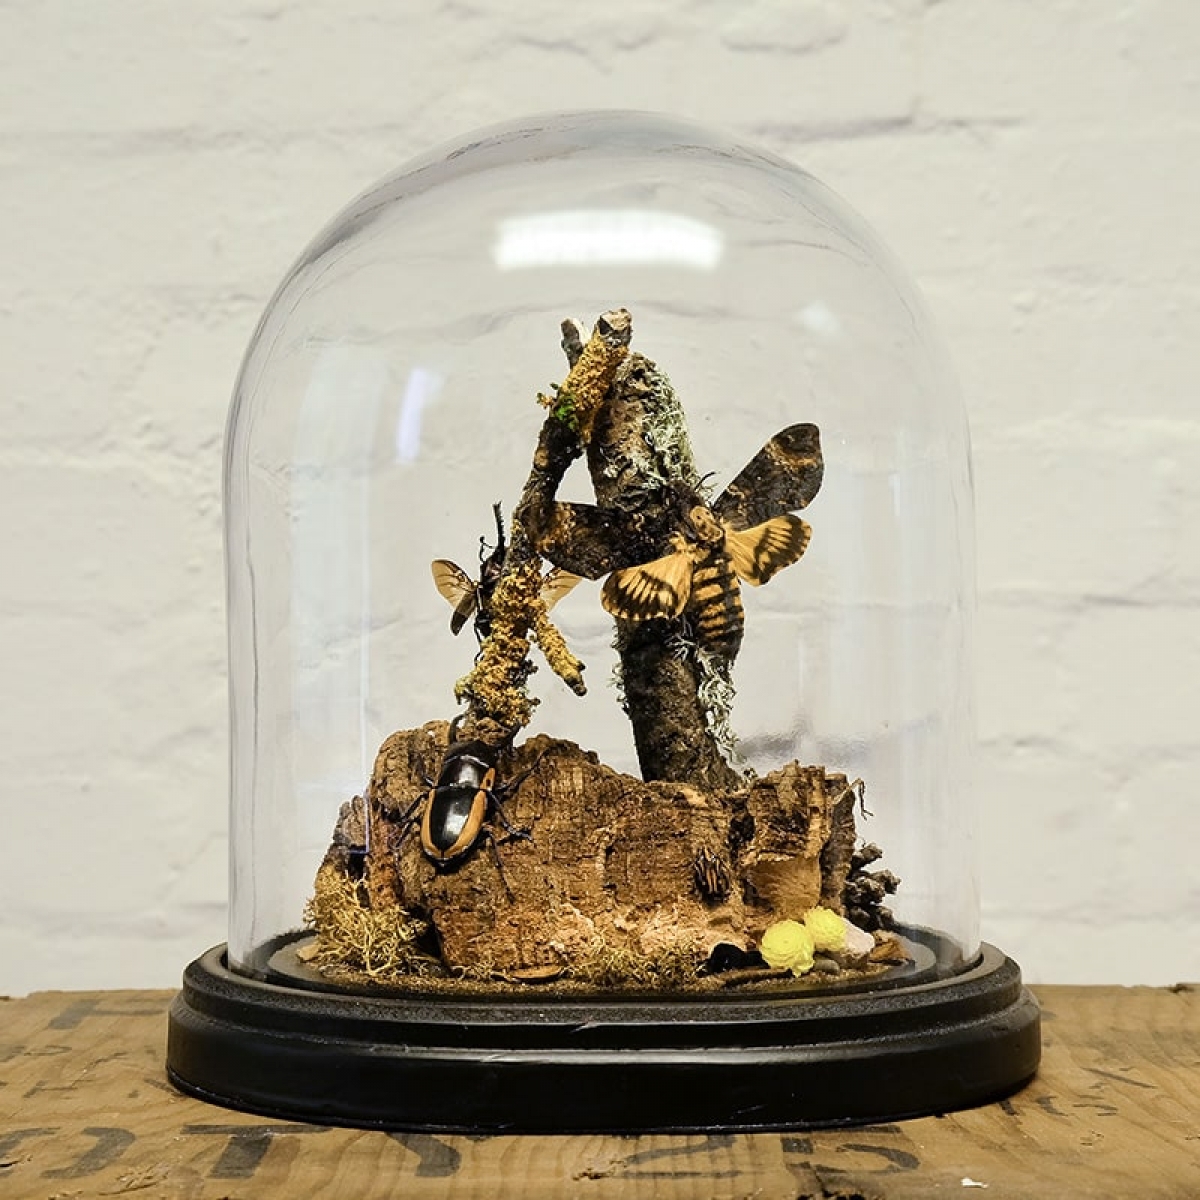 Minibeast Medium Glass Dome with Deaths Head Moth, Saw Tooth and Bison Beetle